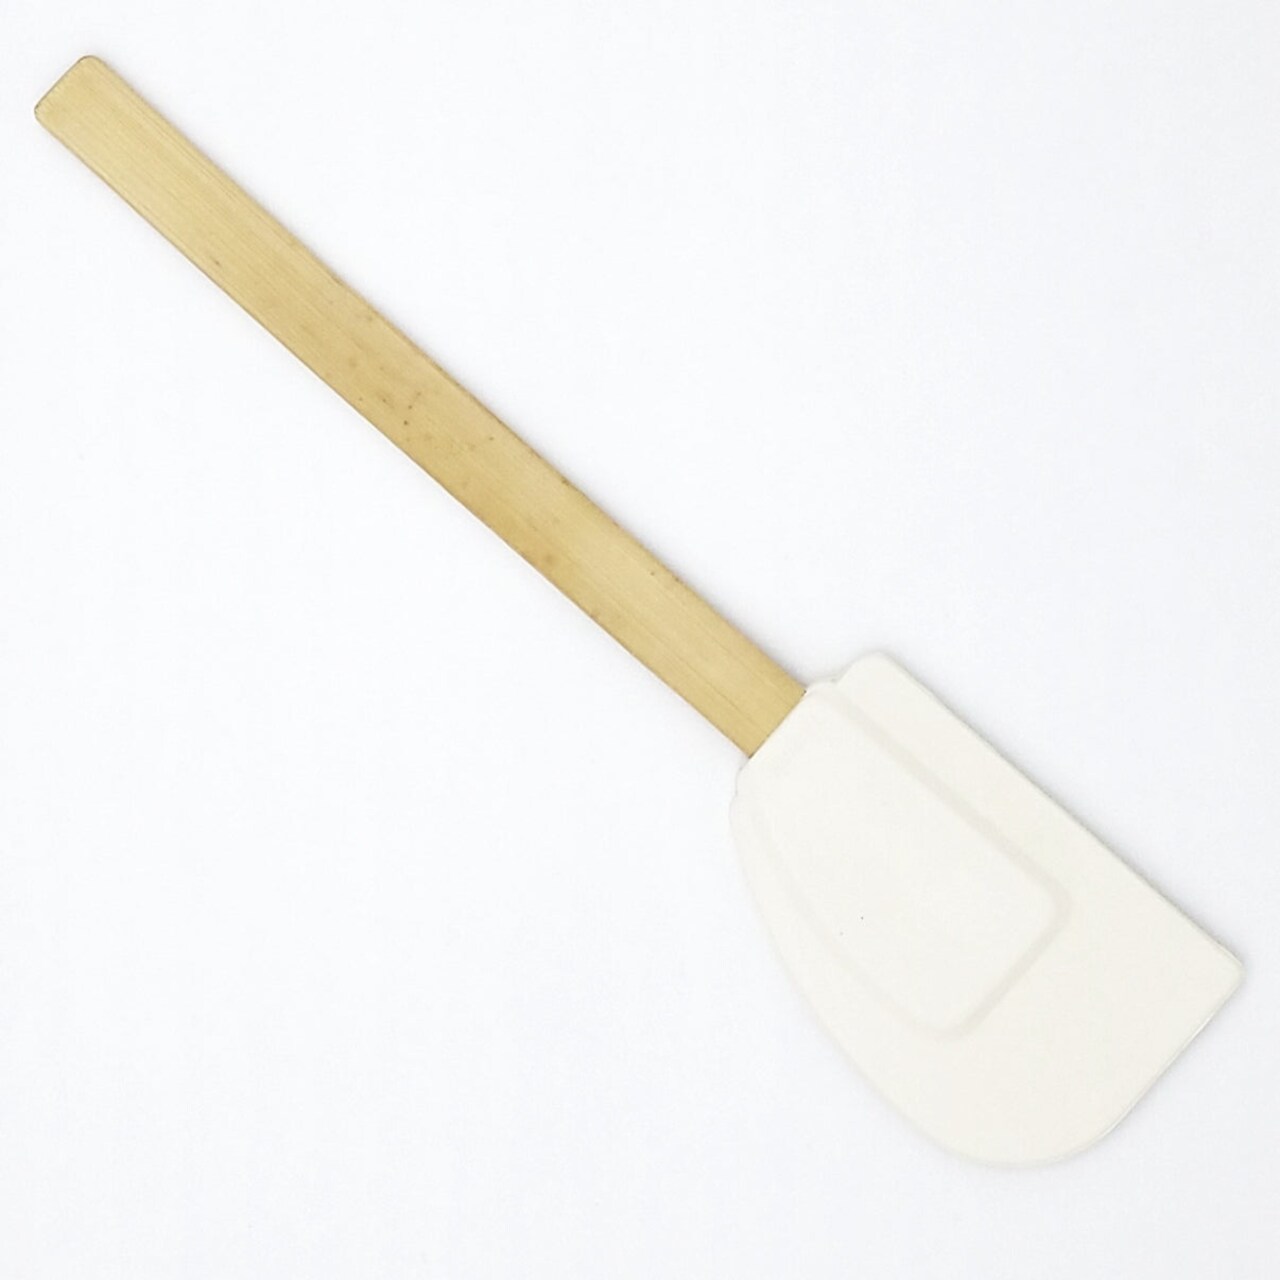 Rubber Bowl Scraper with Bamboo Handle